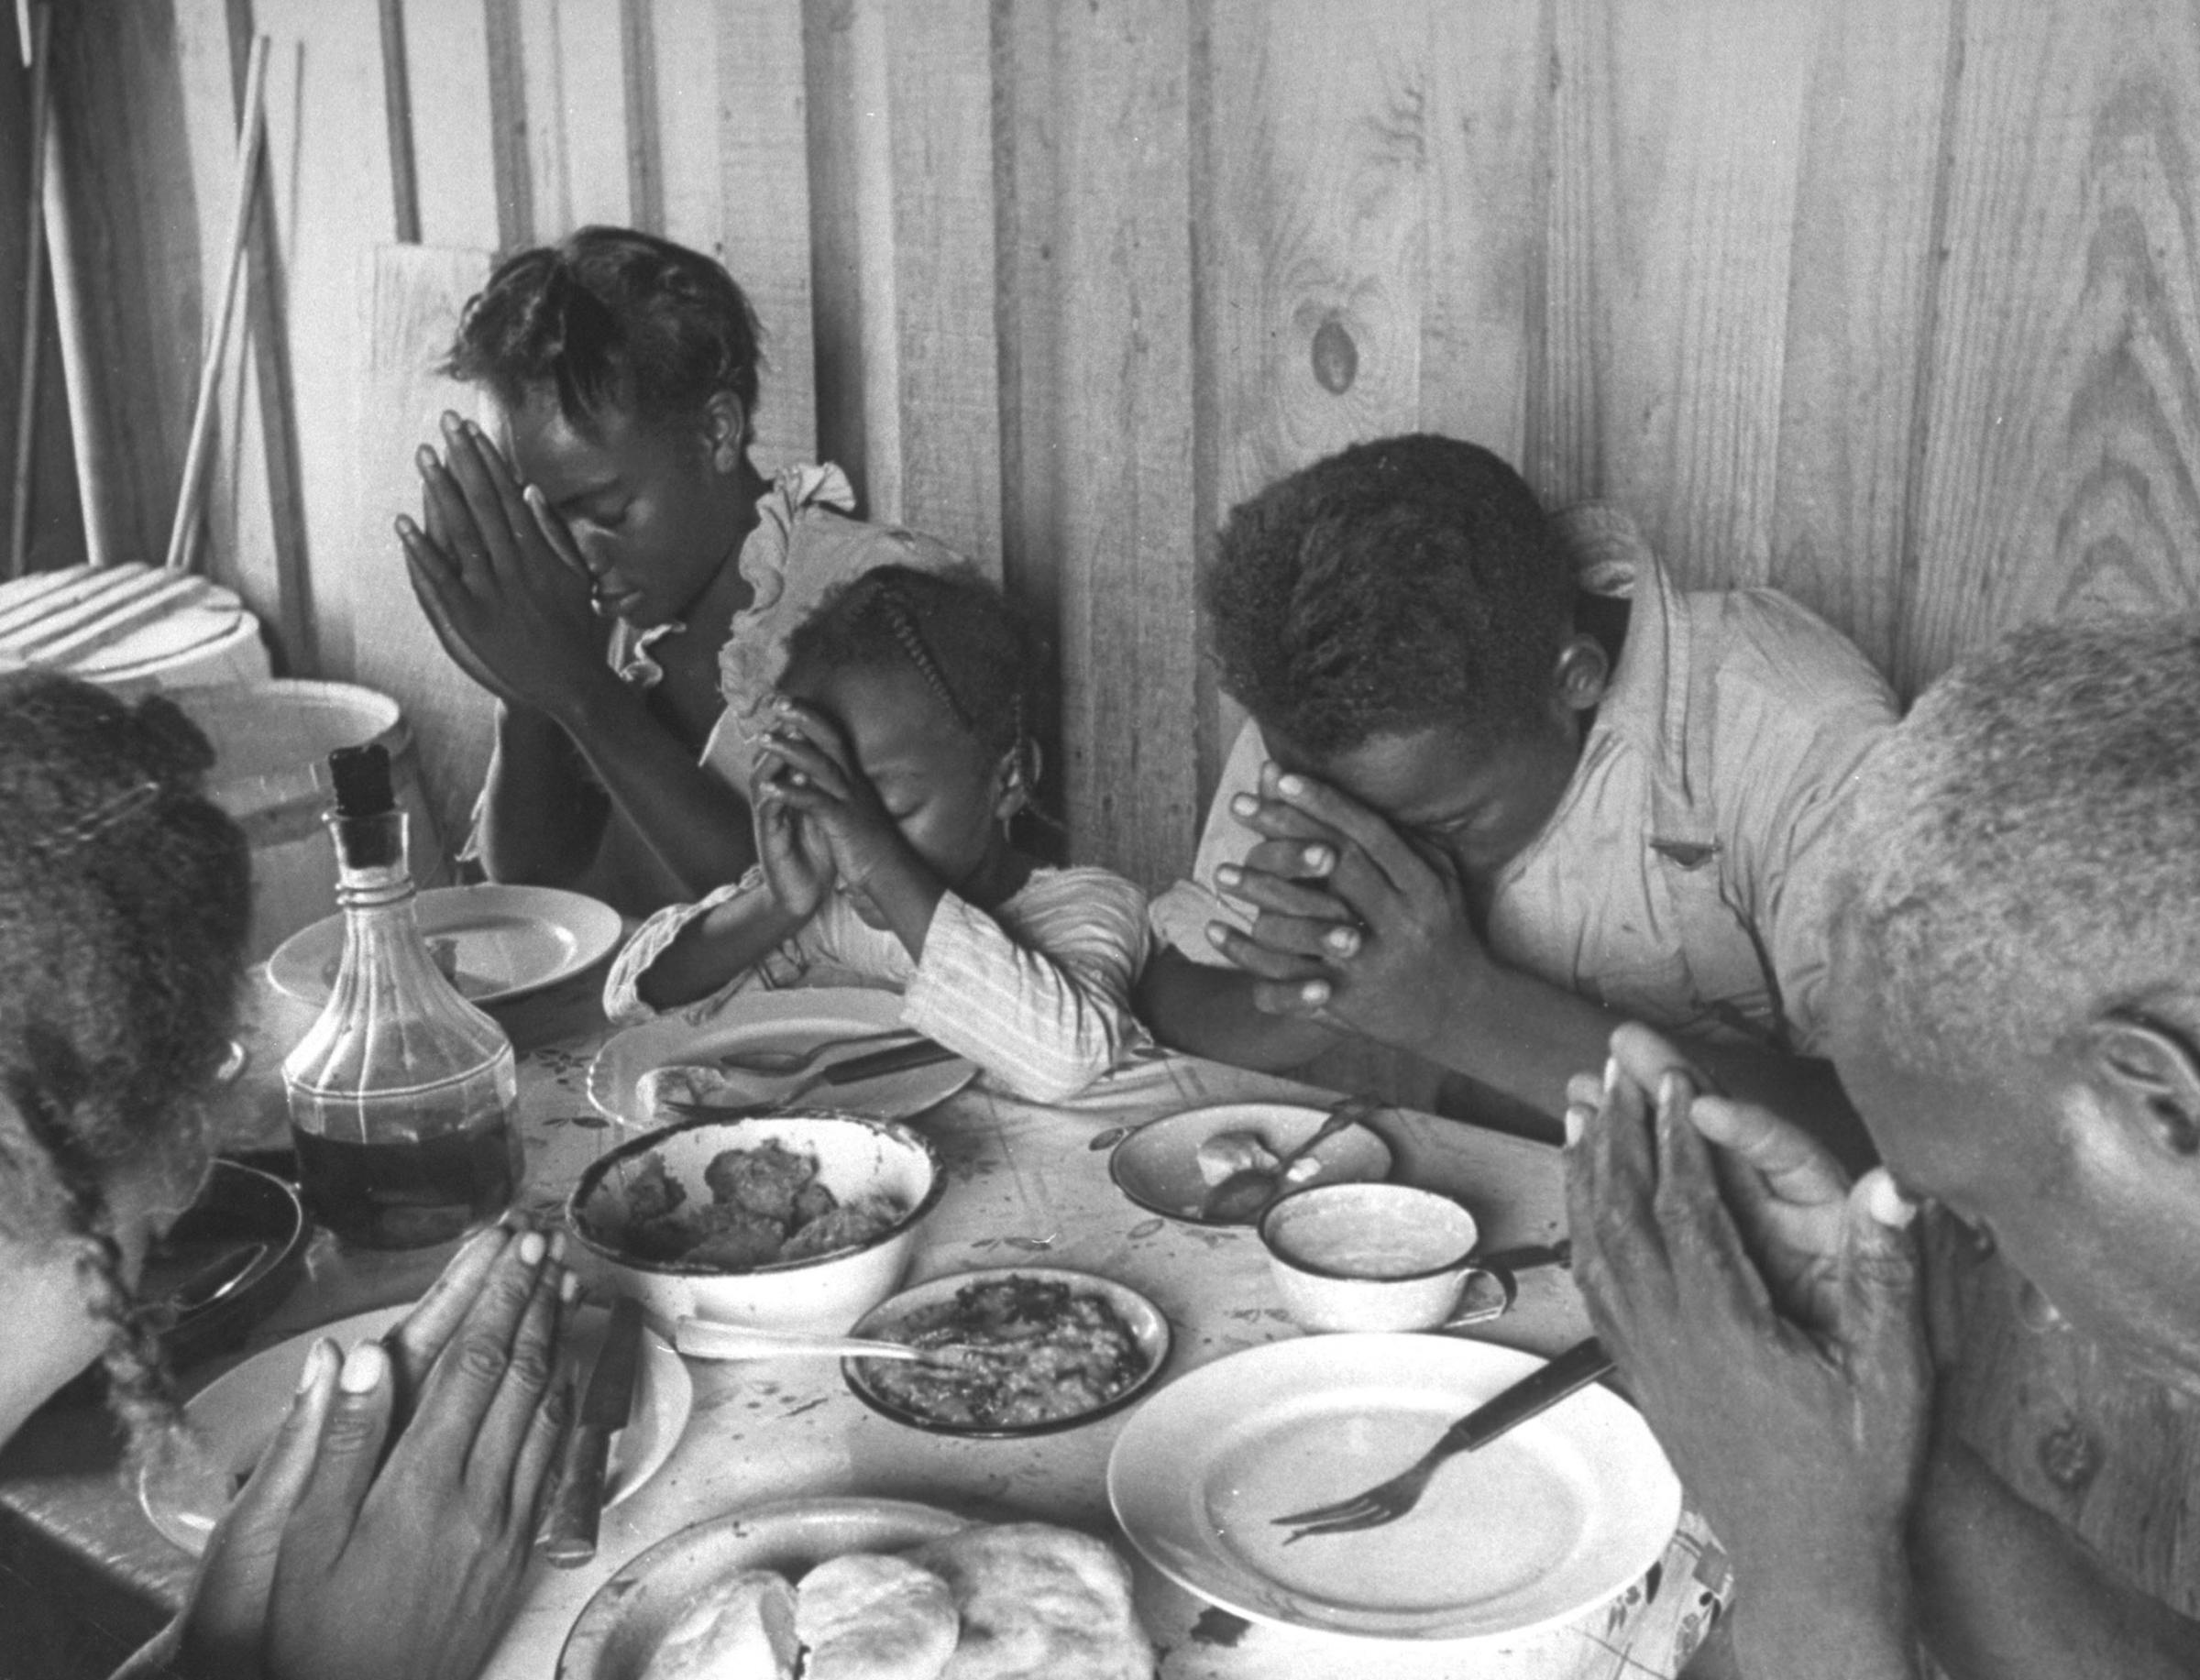 Sharecropper Lonnie Fair and his family praying before a meal, Mississippi, 1936.